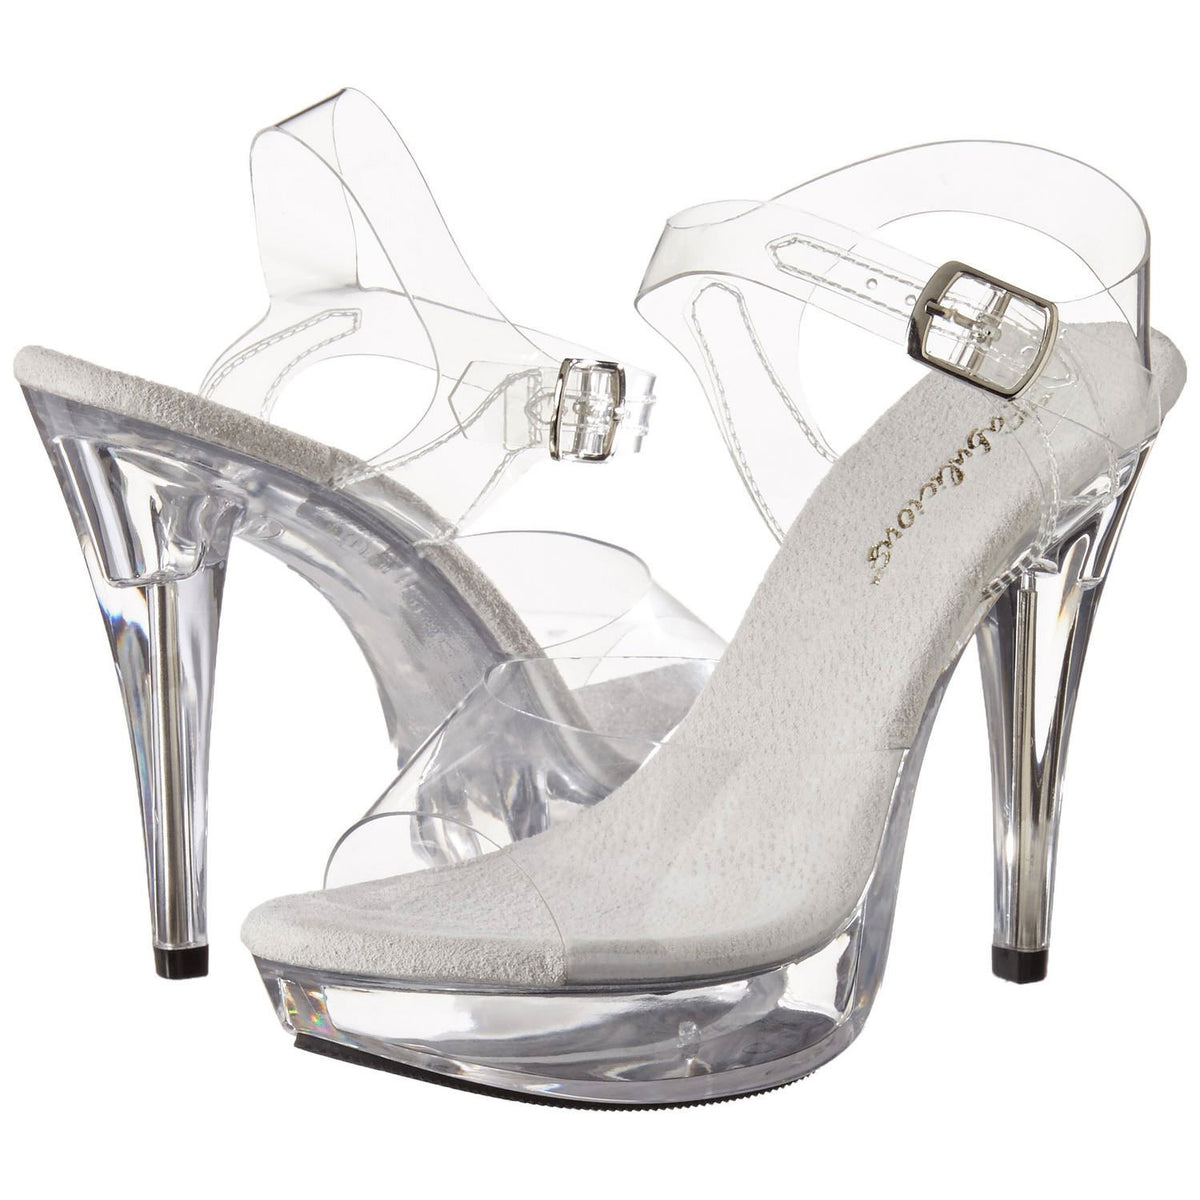 FABULICIOUS COCKTAIL-508 Clear-Clear Ankle Strap Sandals - Shoecup.com - 1